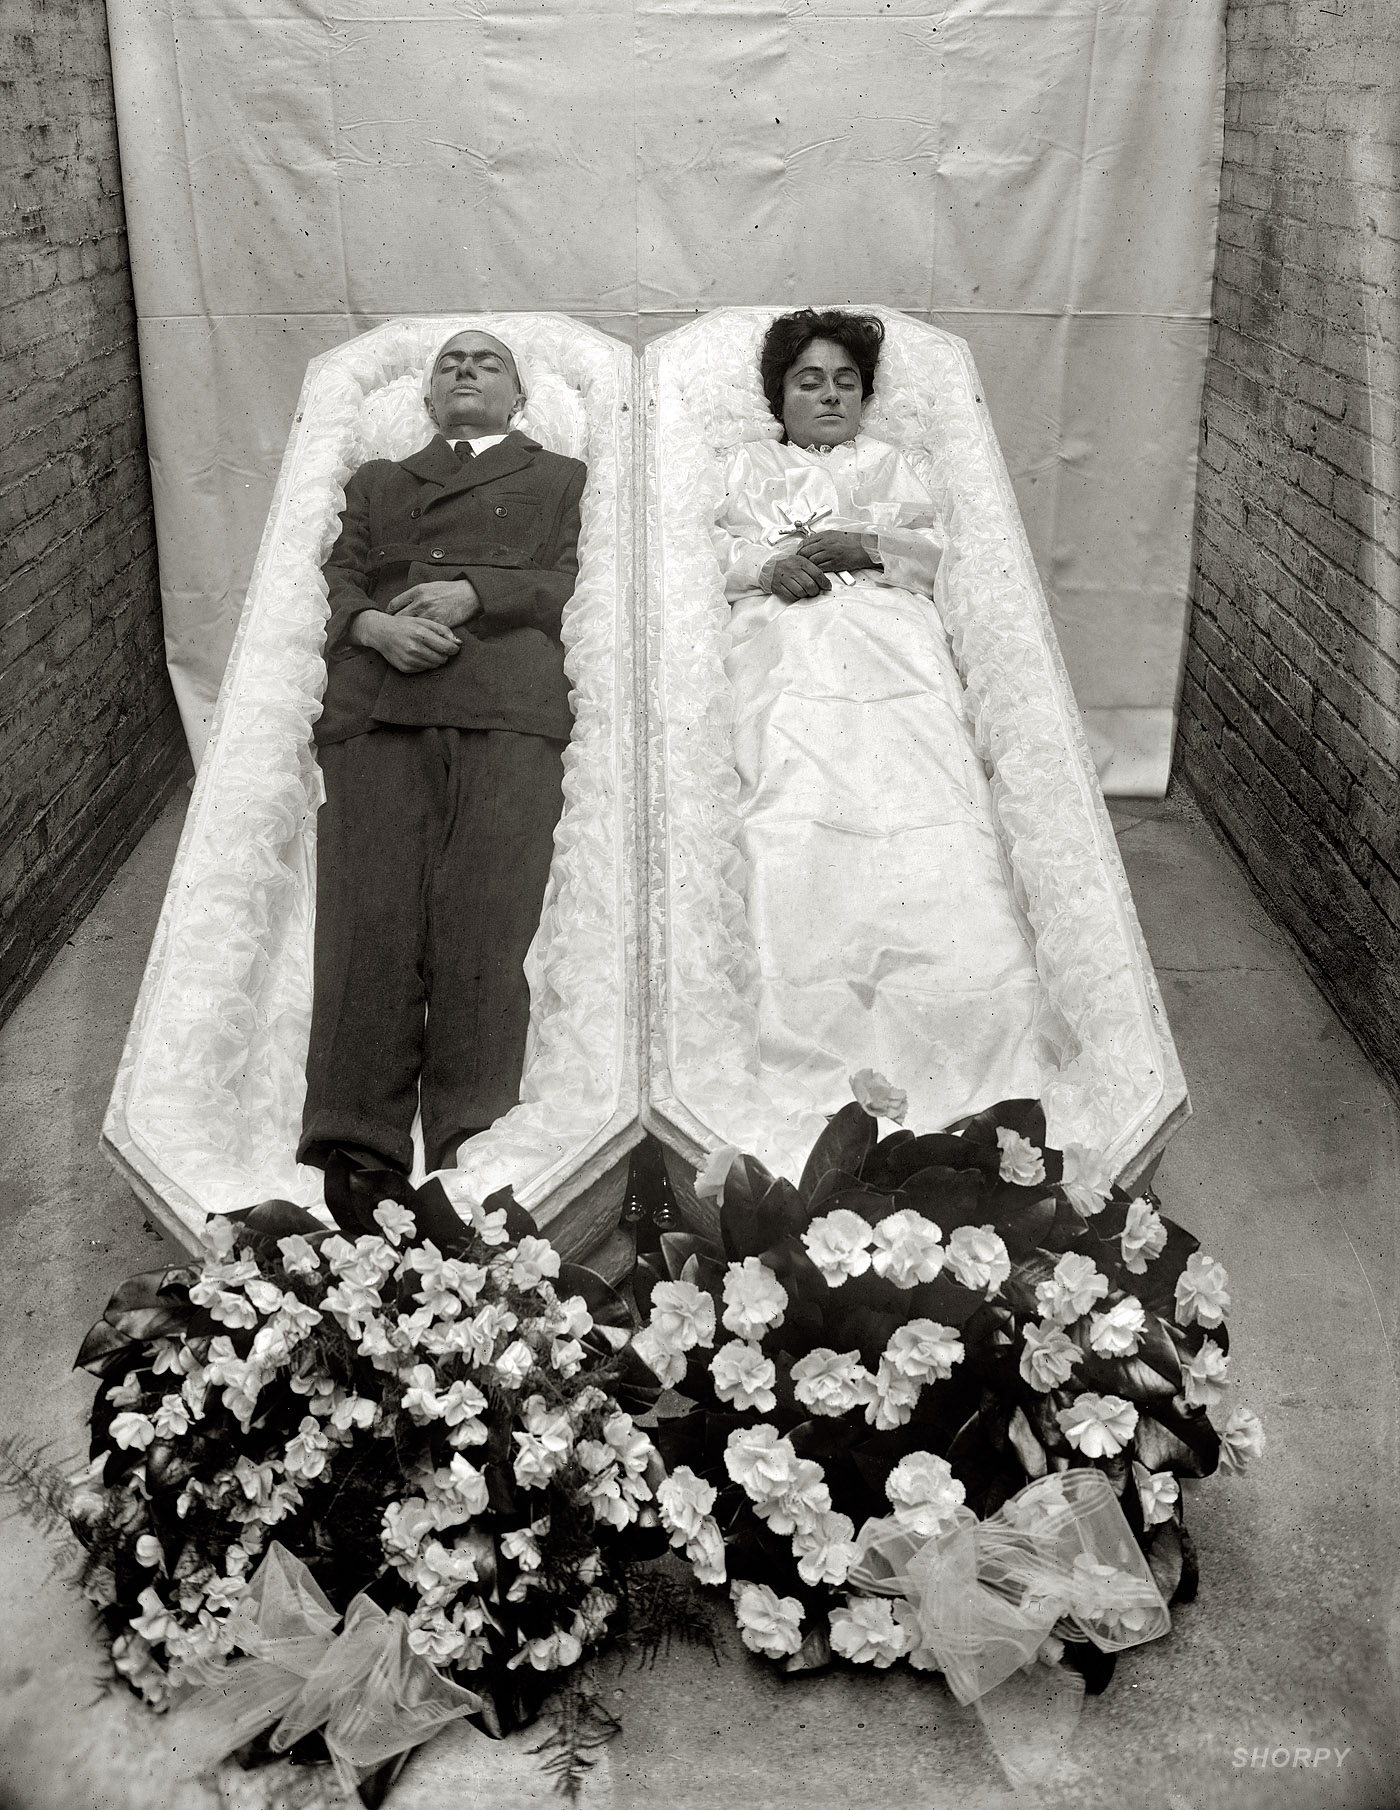 "Greek murder." July 1920. Two victims of a bloody altercation involving a hatchet and revolver that left three people dead in a rooming house at 809 Ninth Street in Washington. National Photo Company glass negative. View full size.